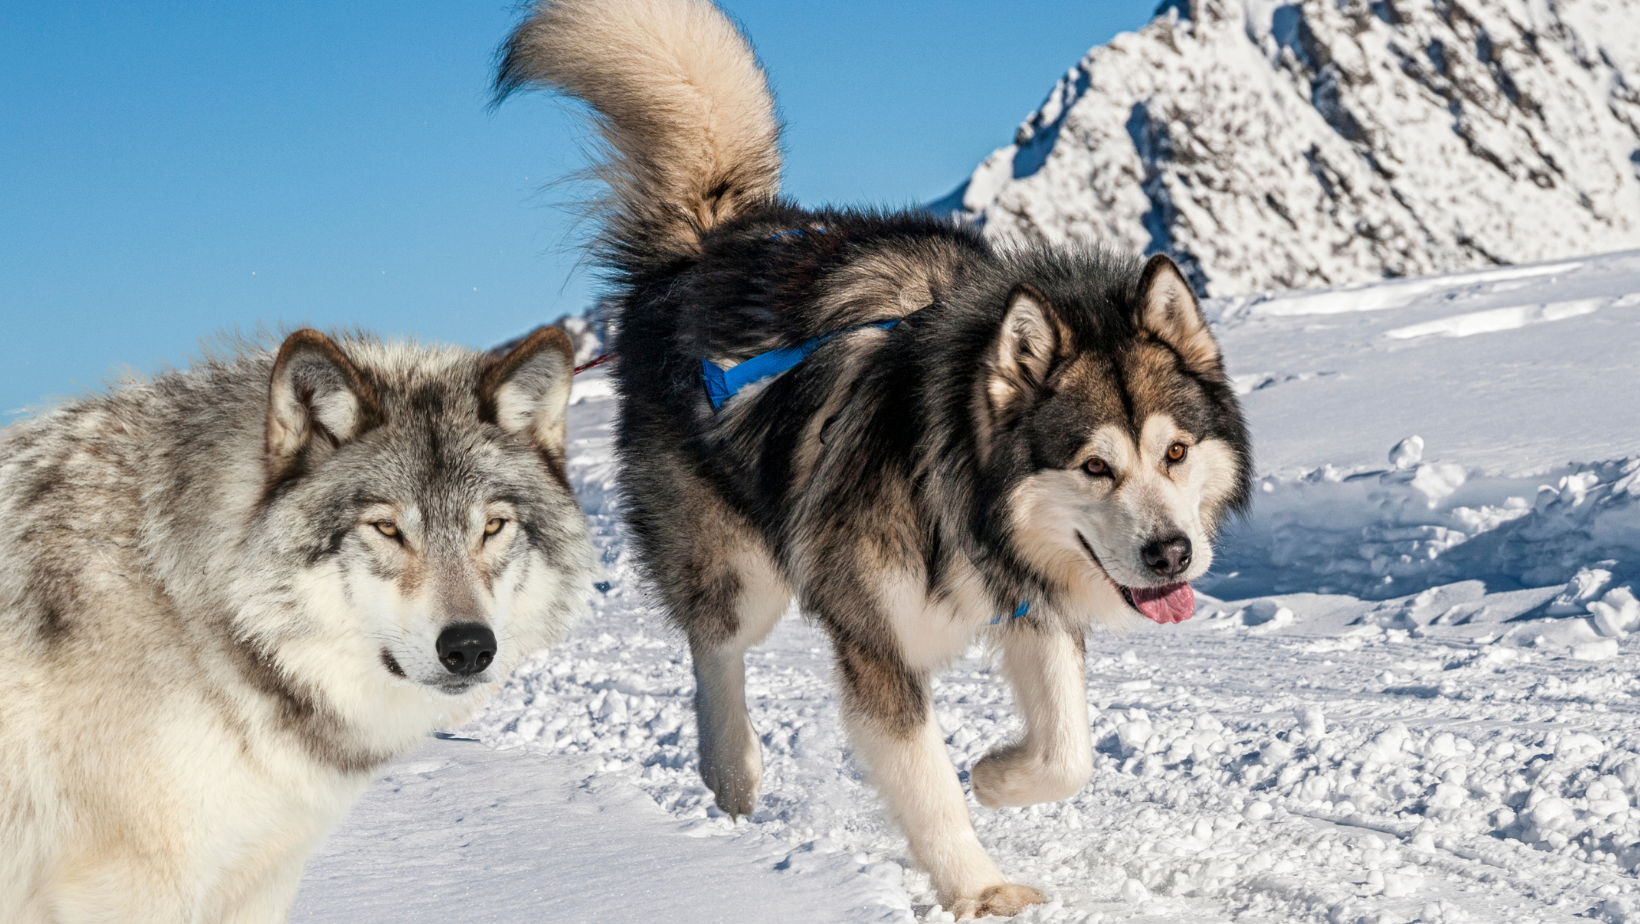 Which breed of dog has the highest percentage of wolf: Malamute